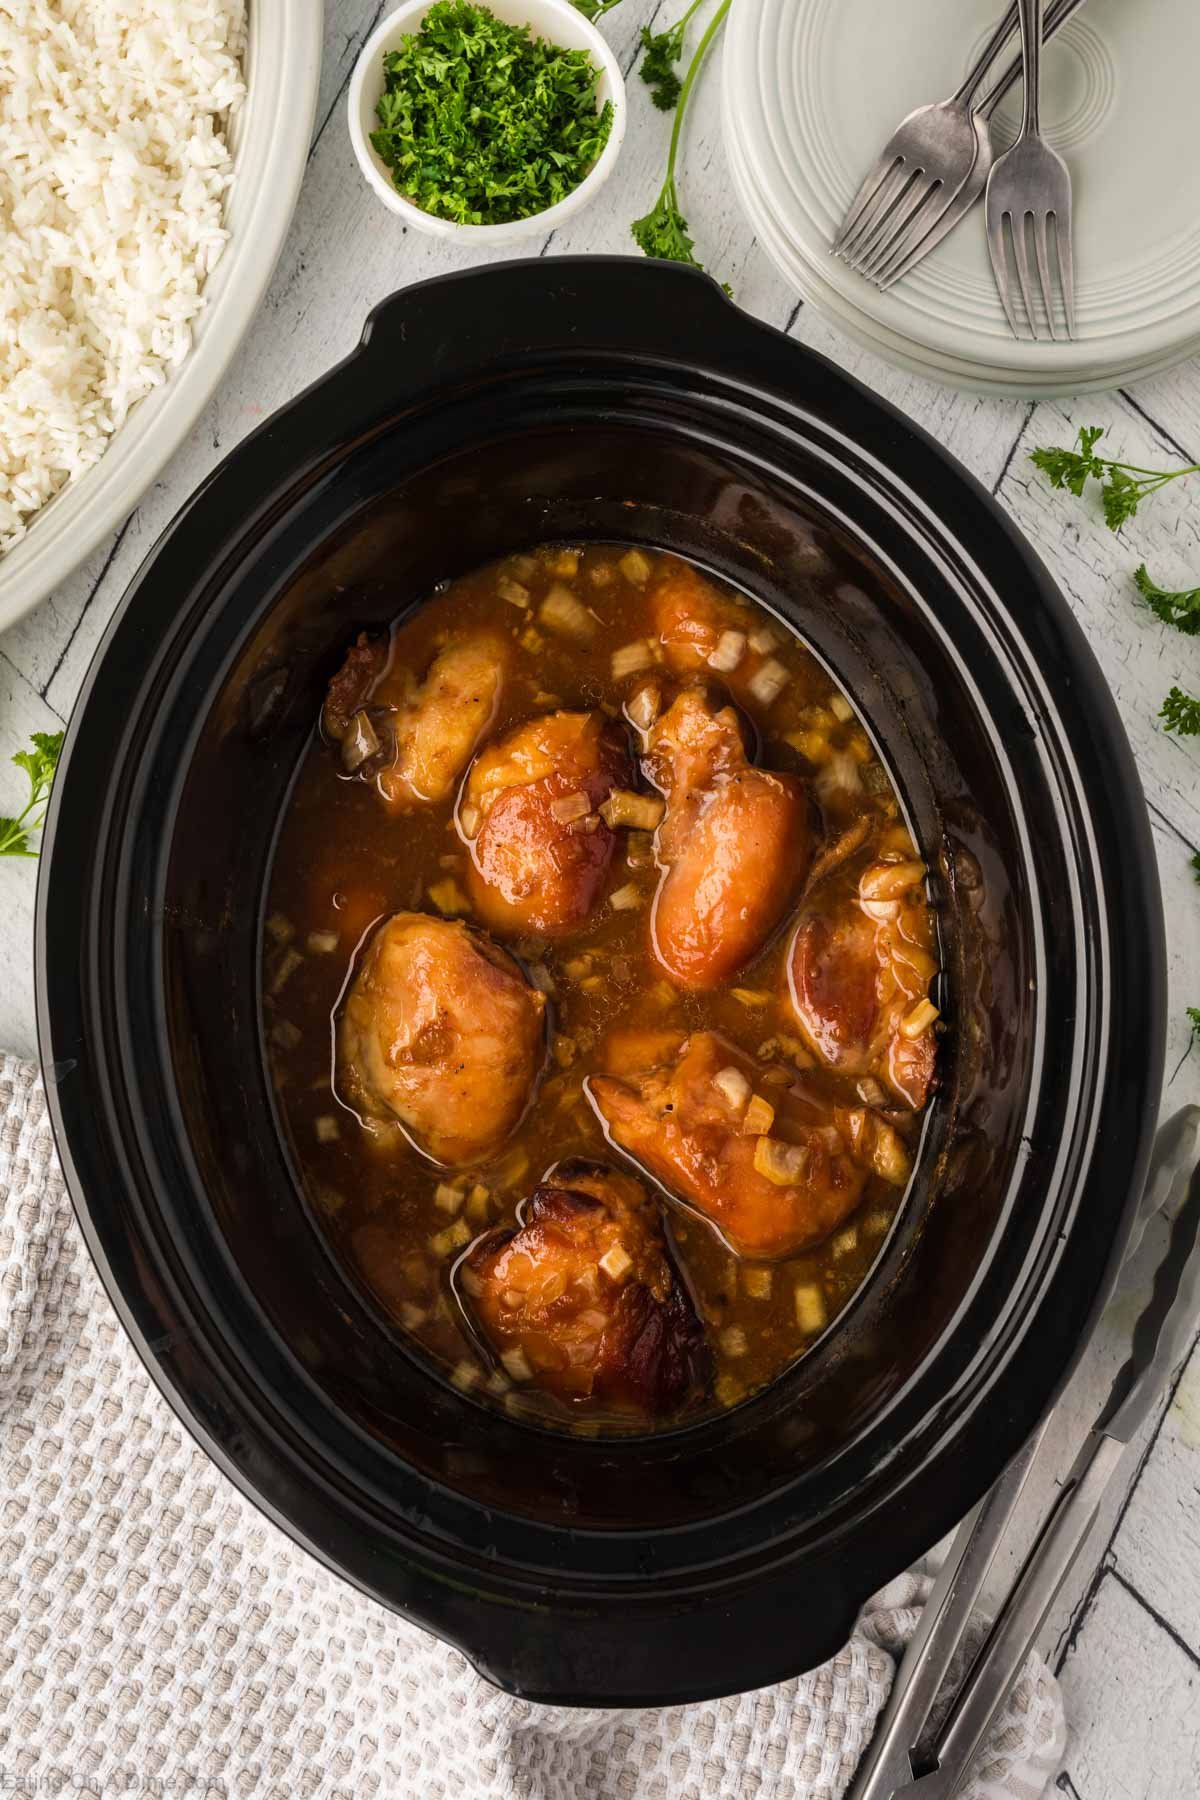 Cooking apricot chicken in the slow cooker